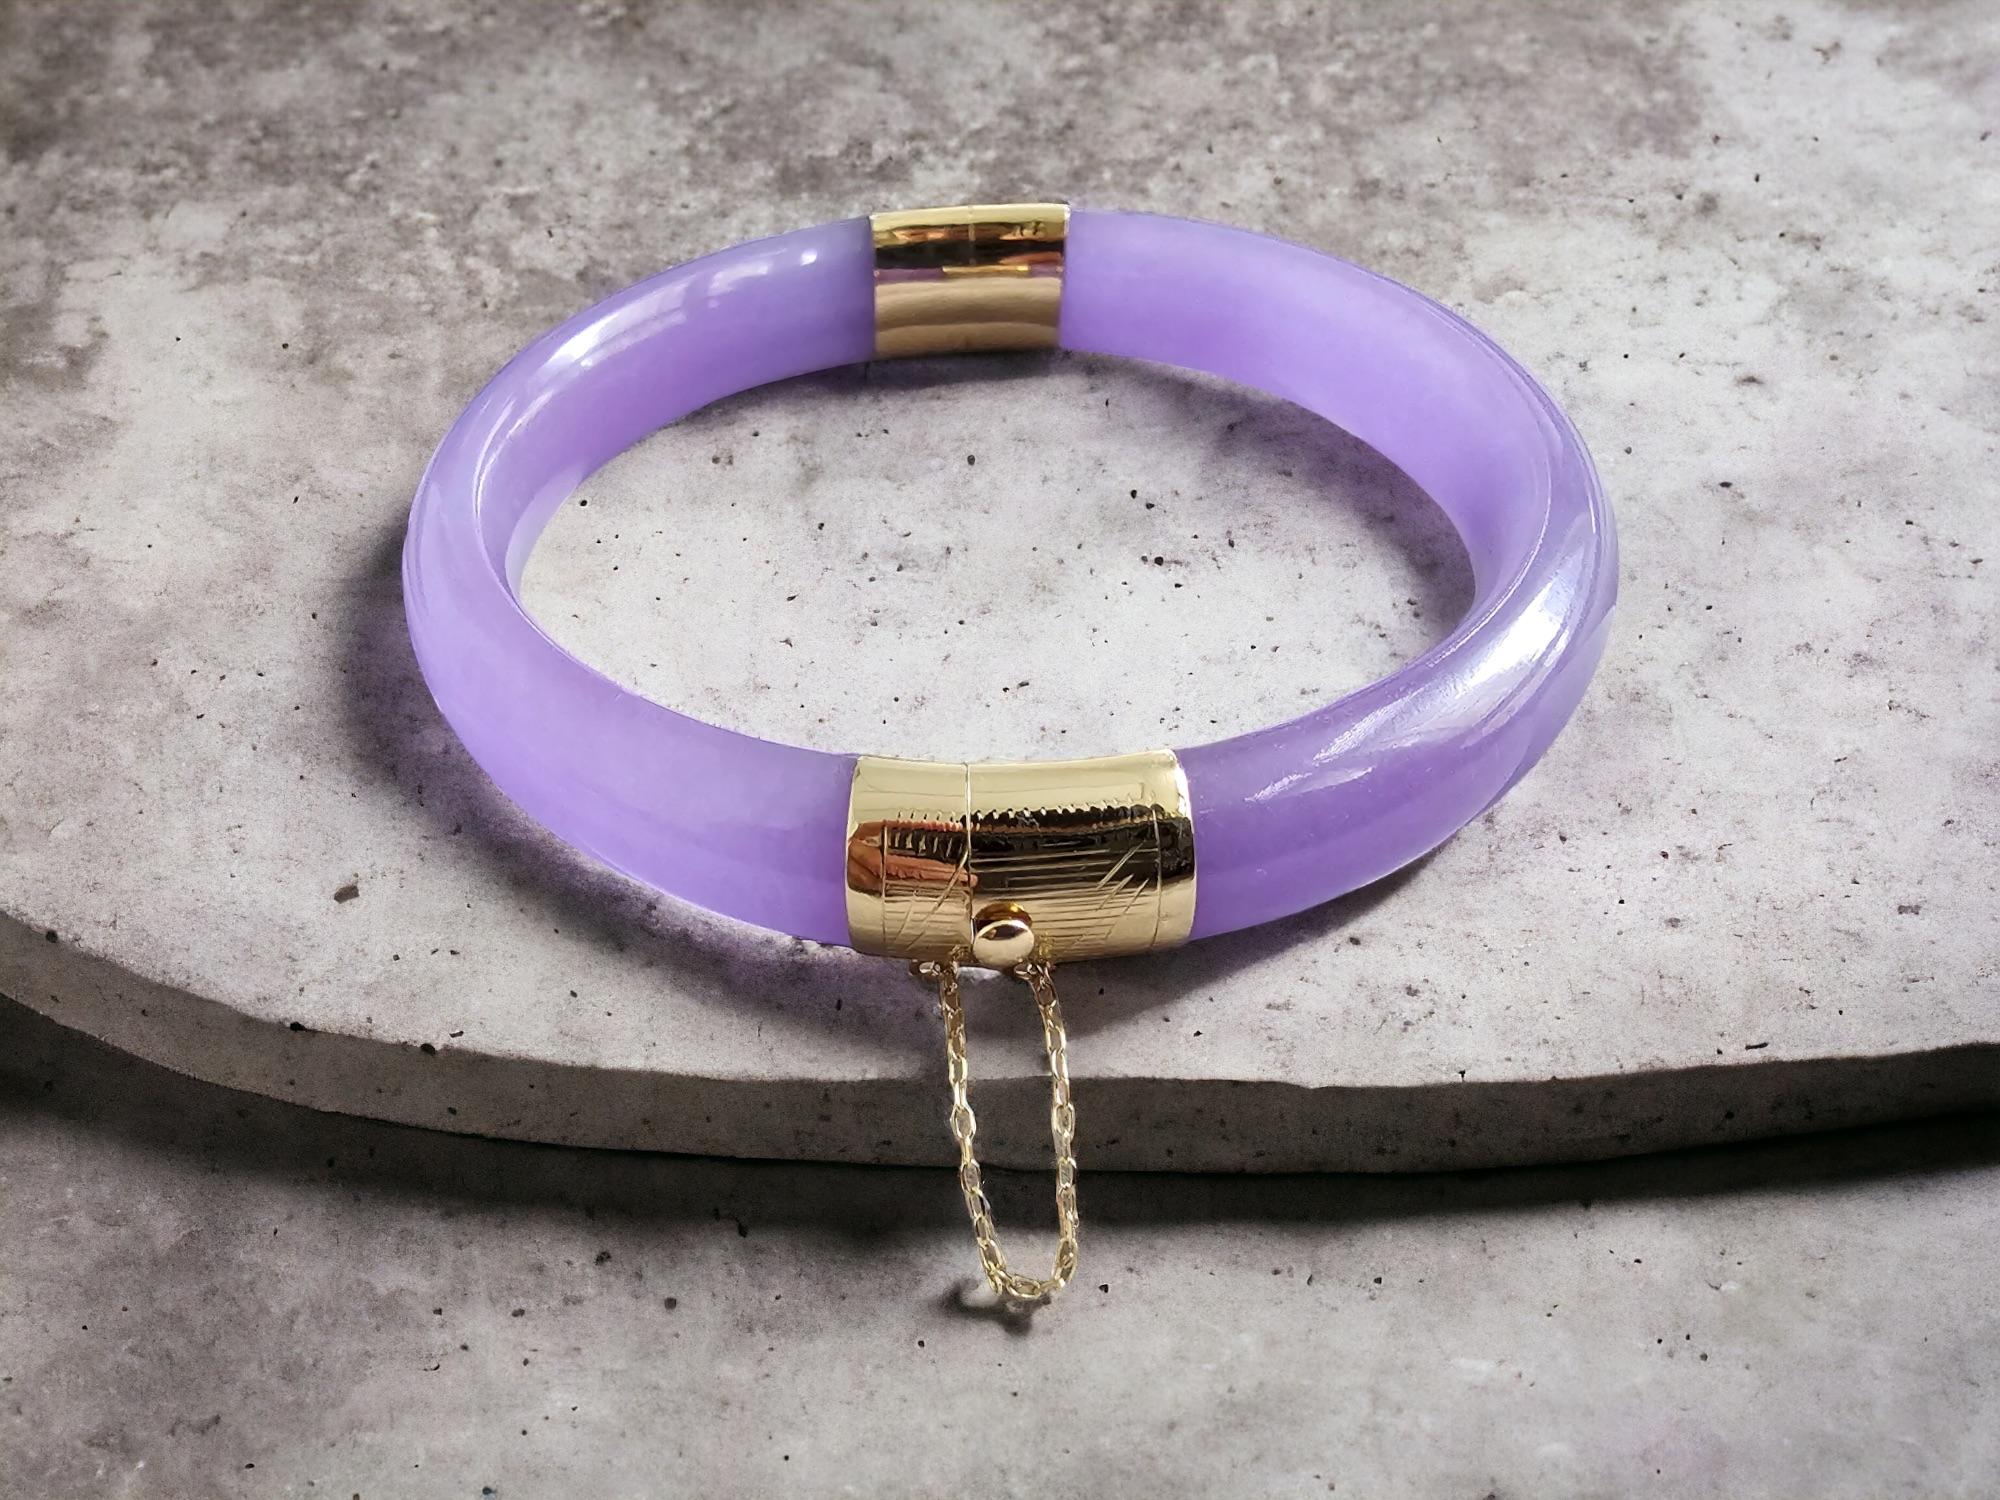 Viceroy's Circular Lavender Jade Bangle Bracelet (with 14K Yellow Gold) For Sale 6